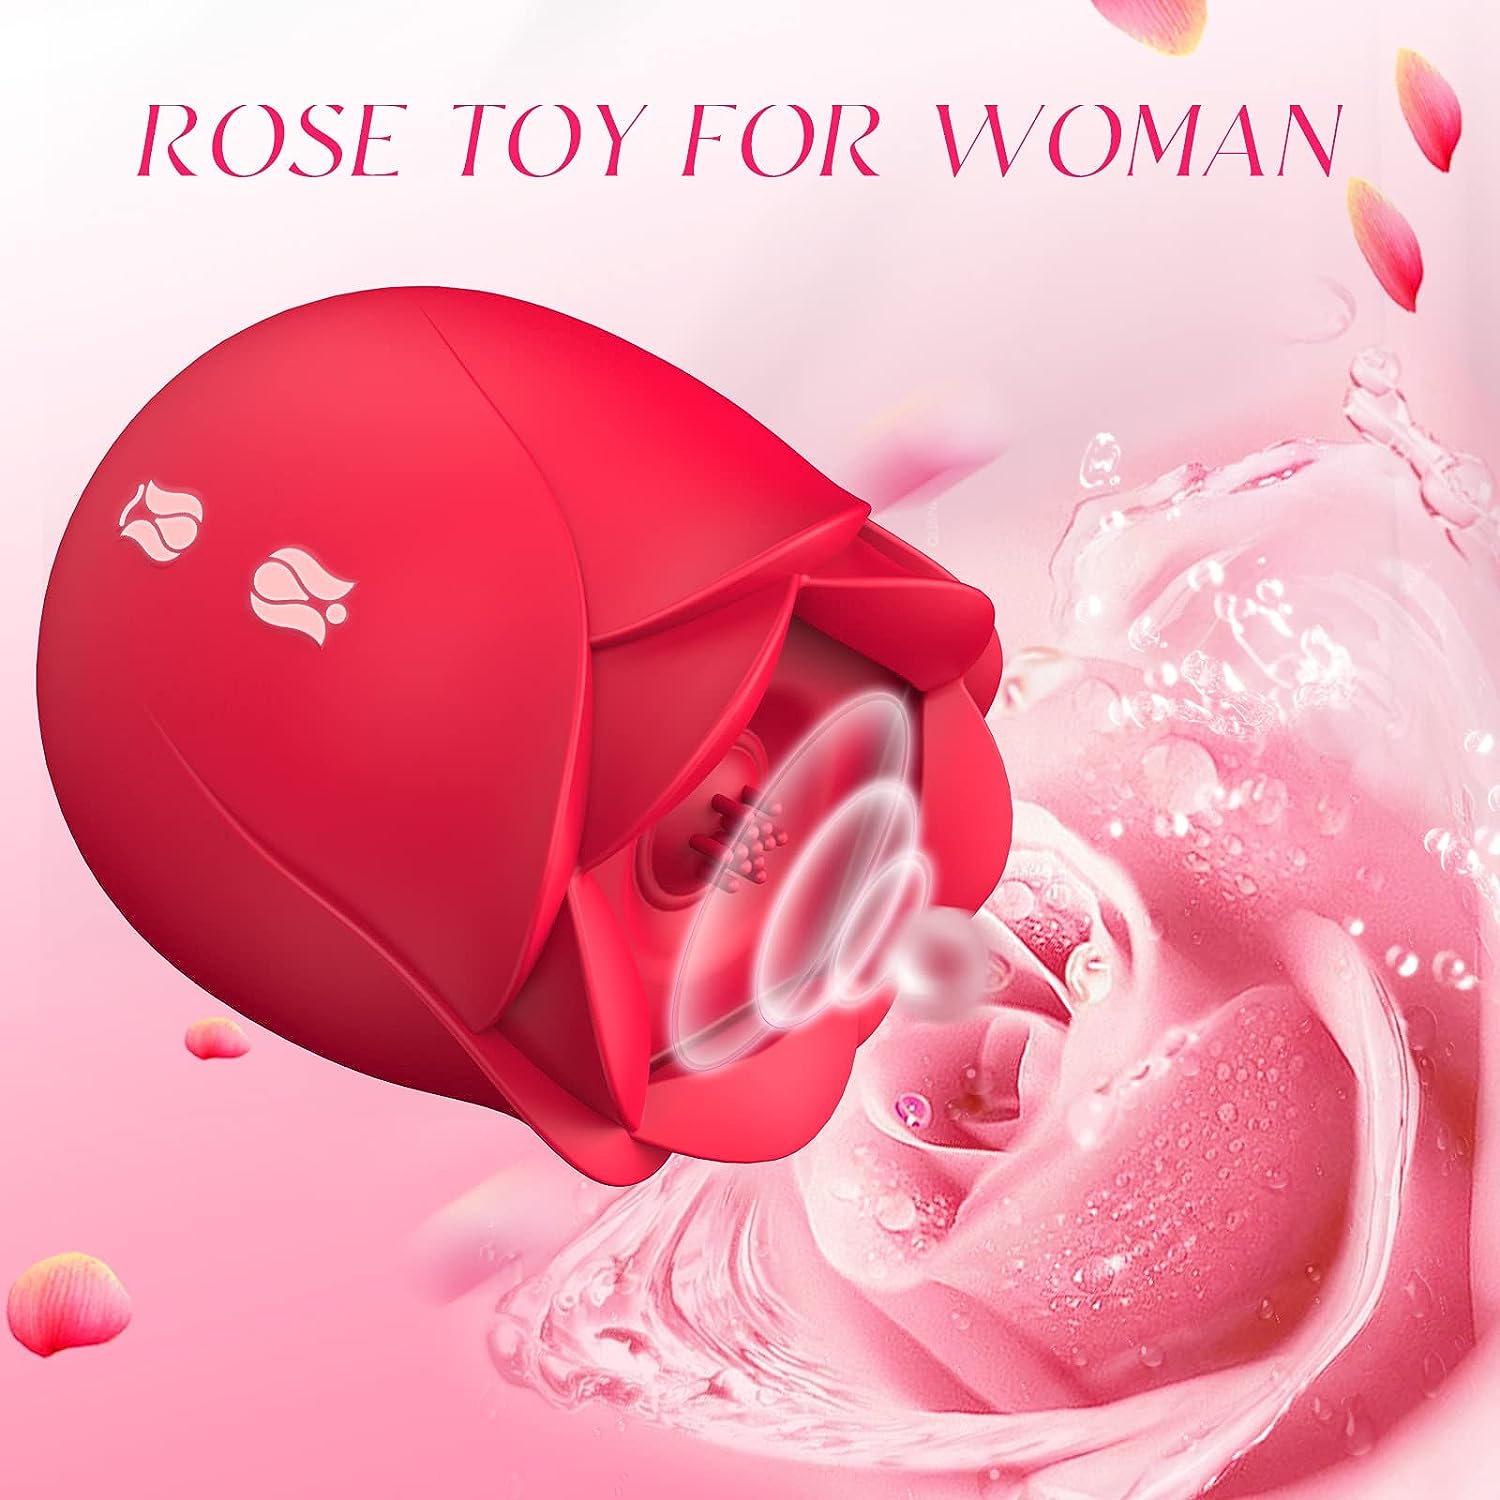 Rose sex toy vibrator for adult woman-sex toys games for women